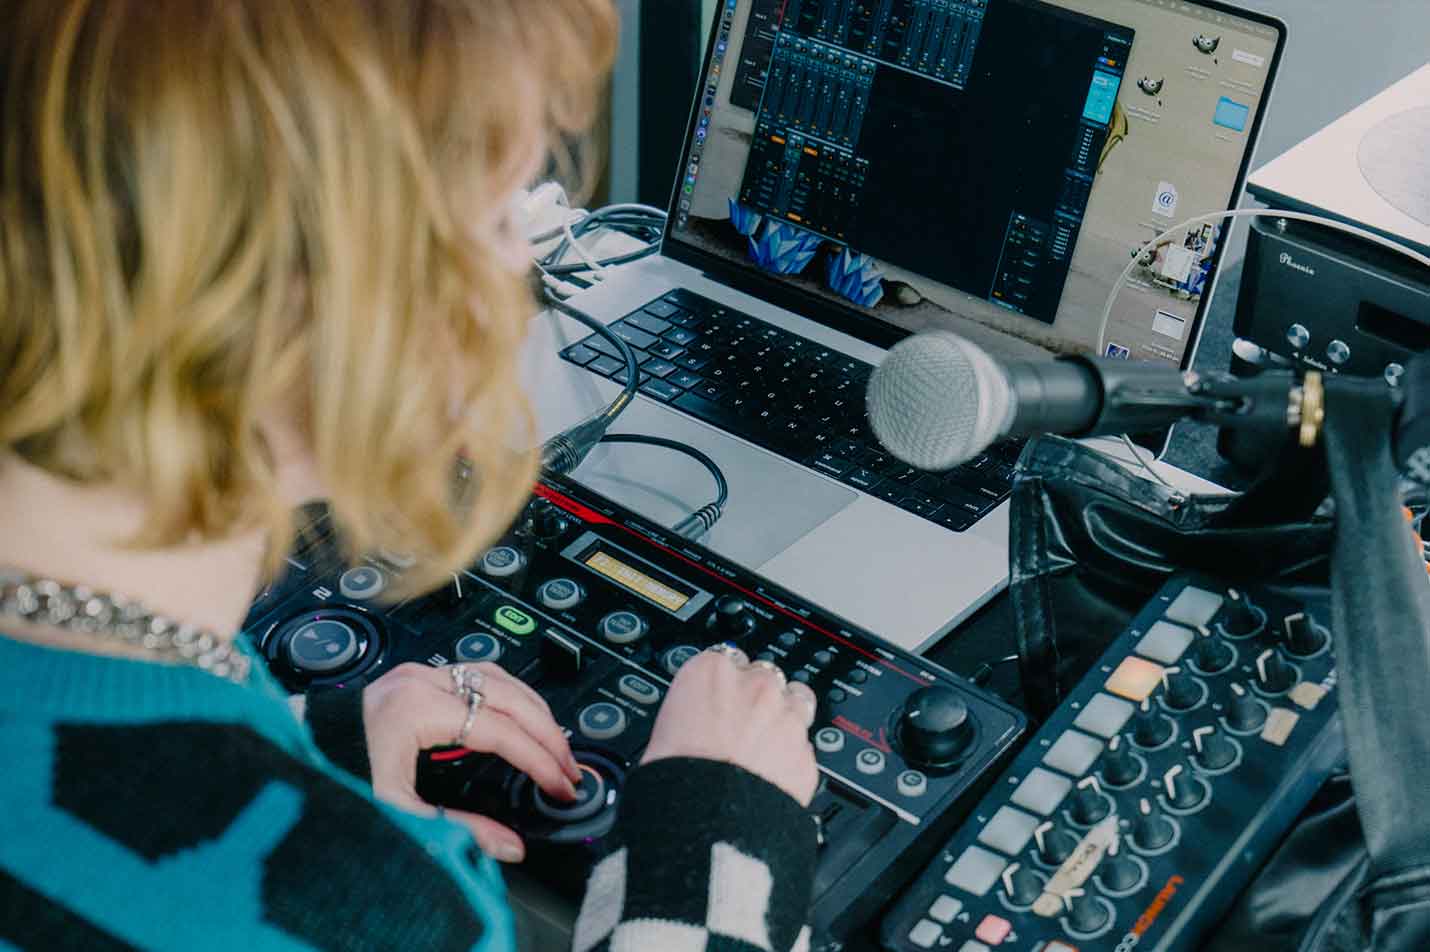 Woman stands over mixing console and microphone in front of a laptop with mixing software